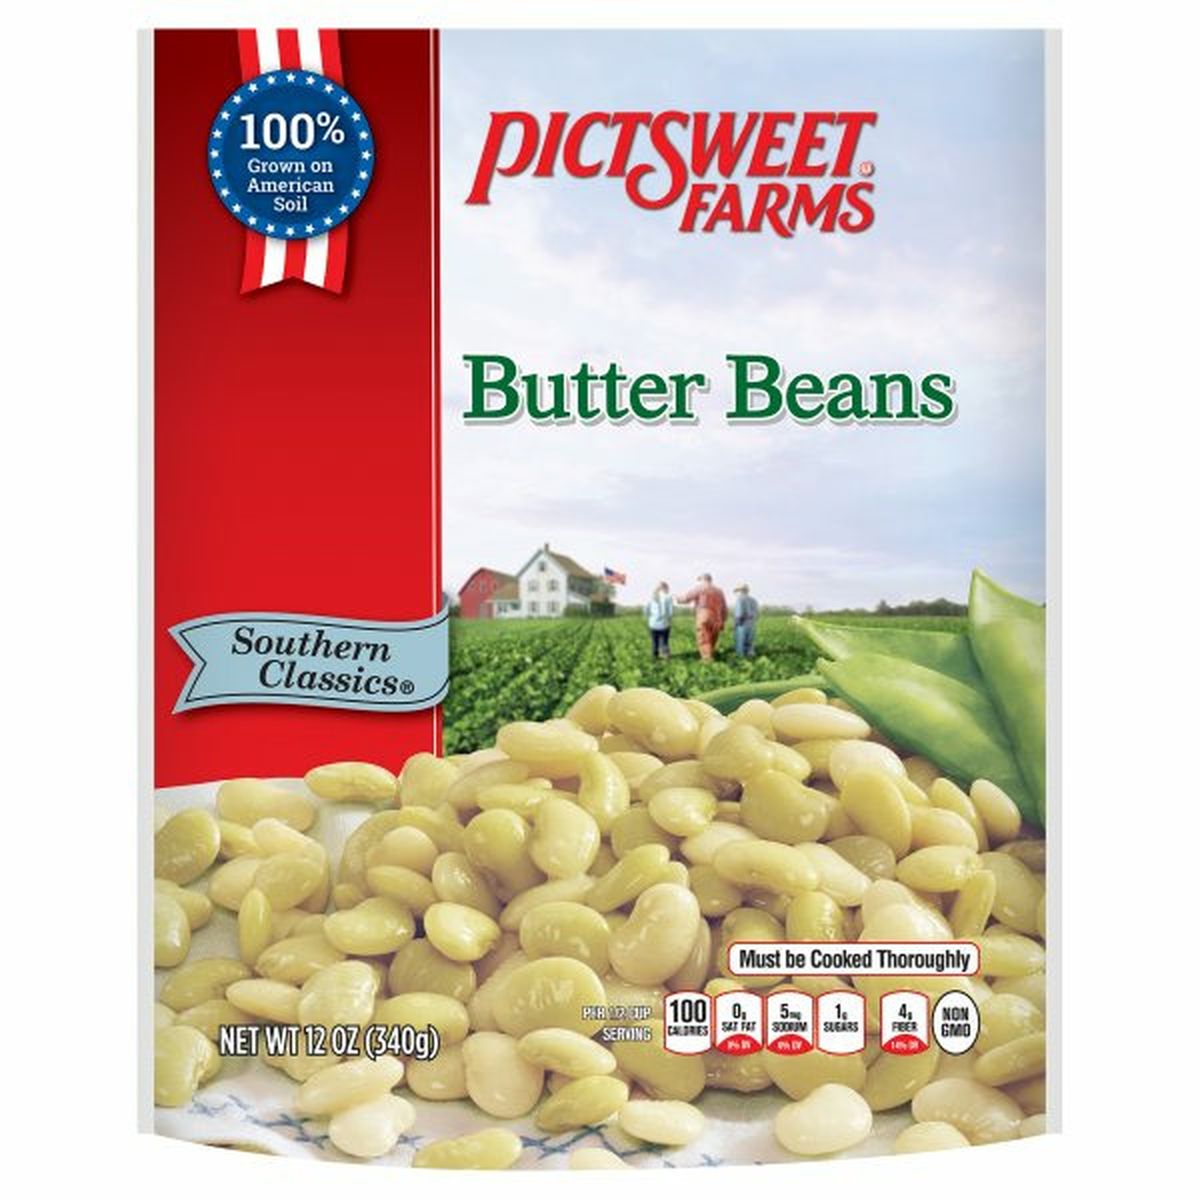 Calories in Pictsweet Farms Southern Classics Butter Beans